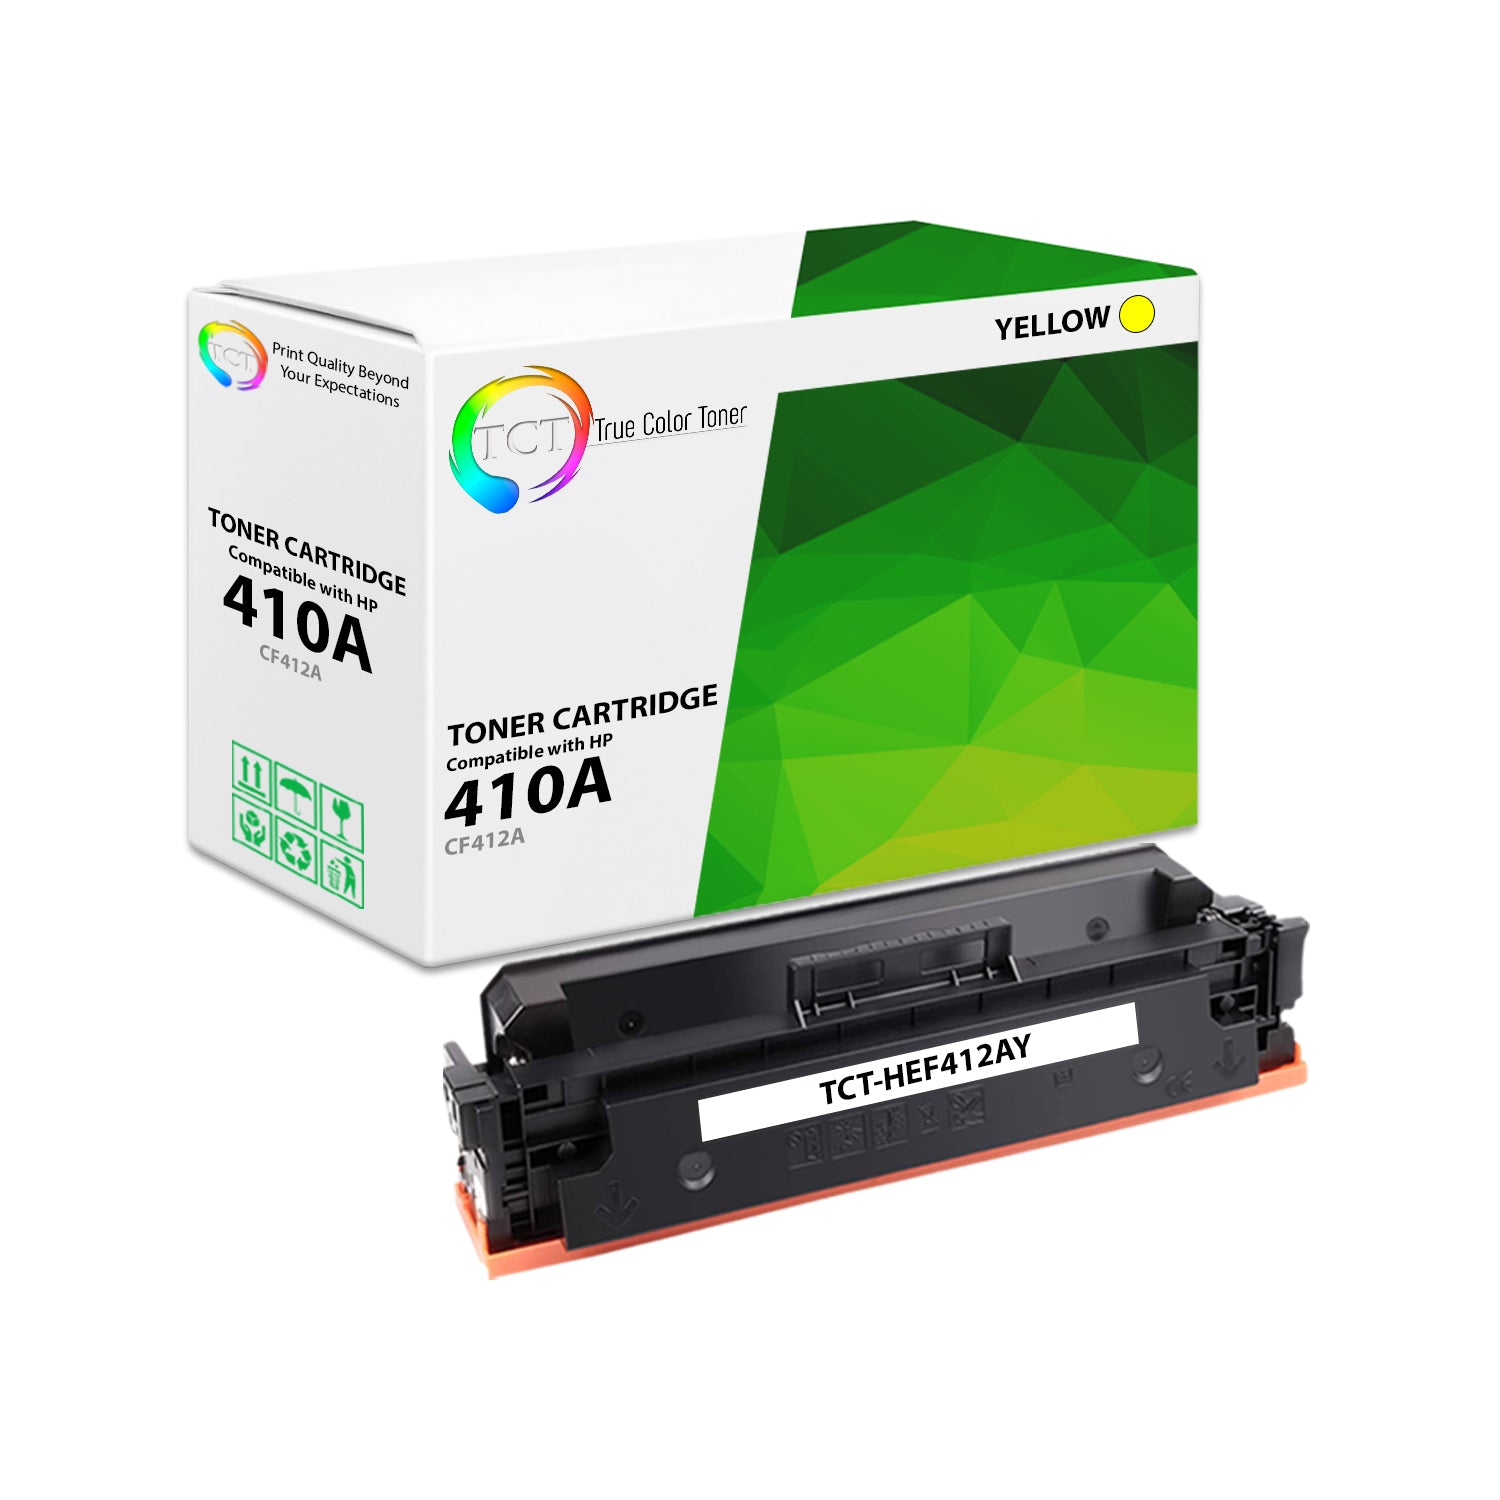 TCT Compatible Toner Cartridge Replacement for the HP 410A Series - 1 Pack Yellow